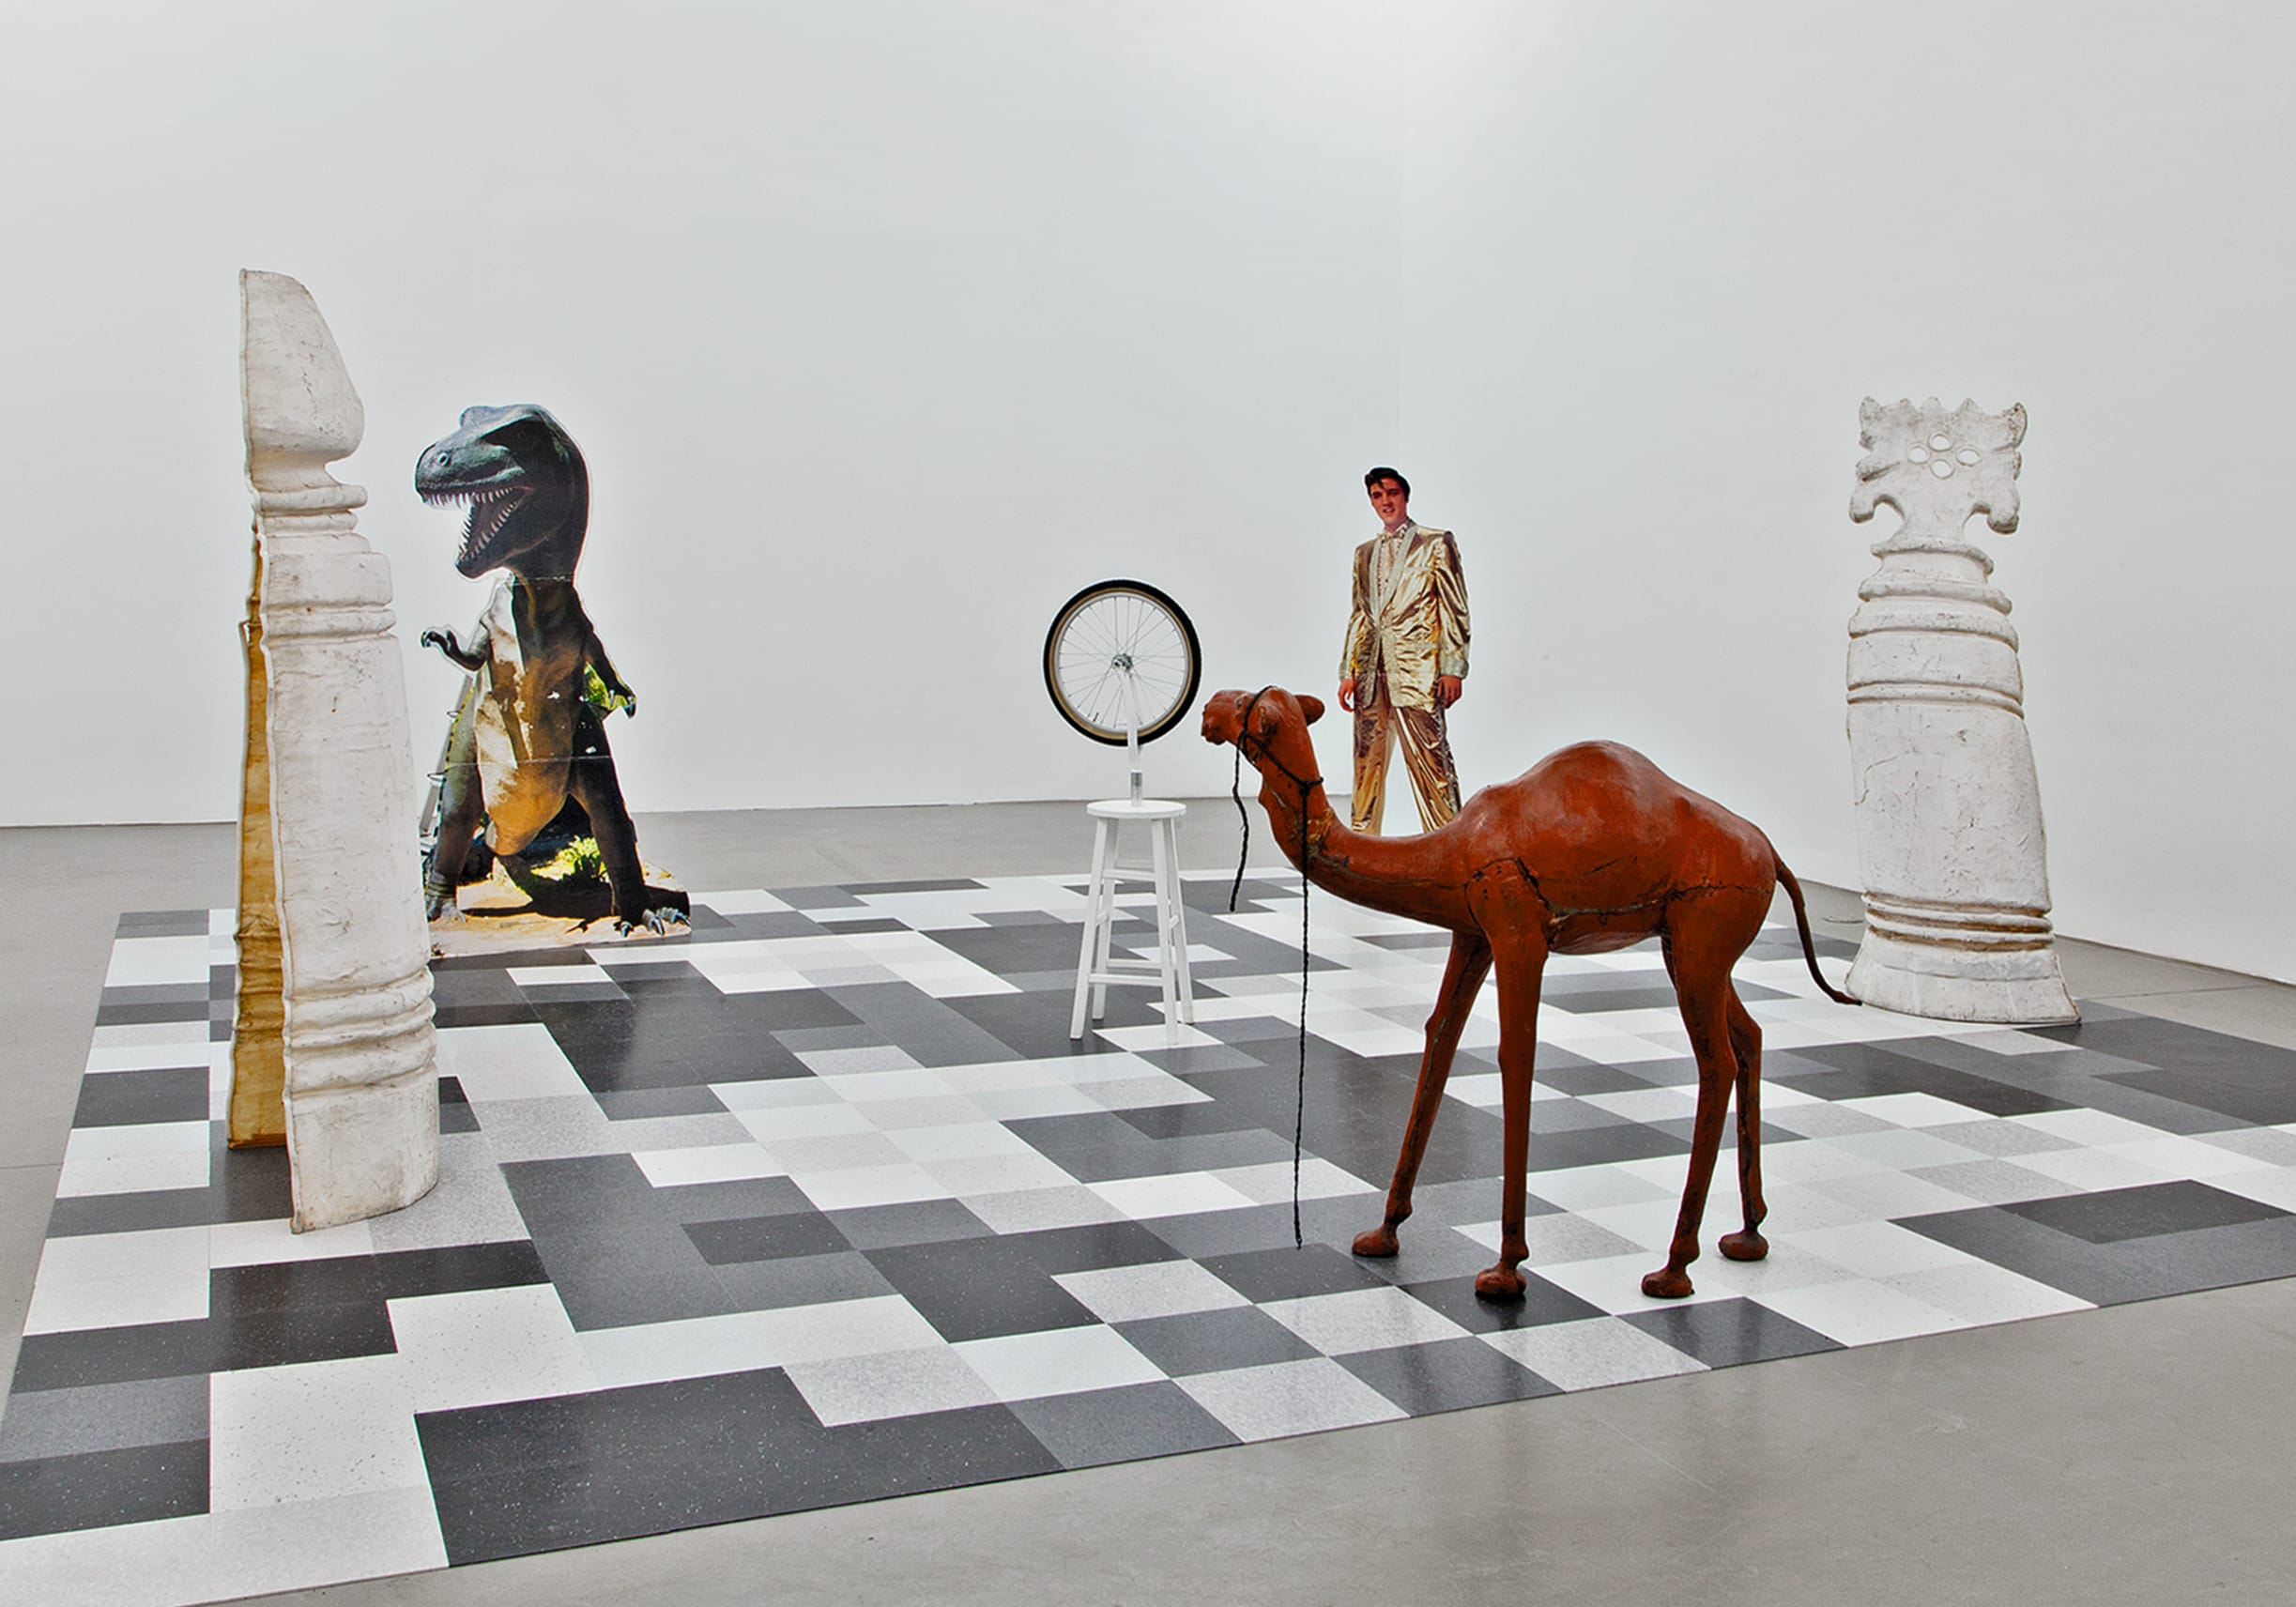 Lutz Bacher, Chess, 2012. Courtesy of the artist’s estate and Galerie Buchholz.